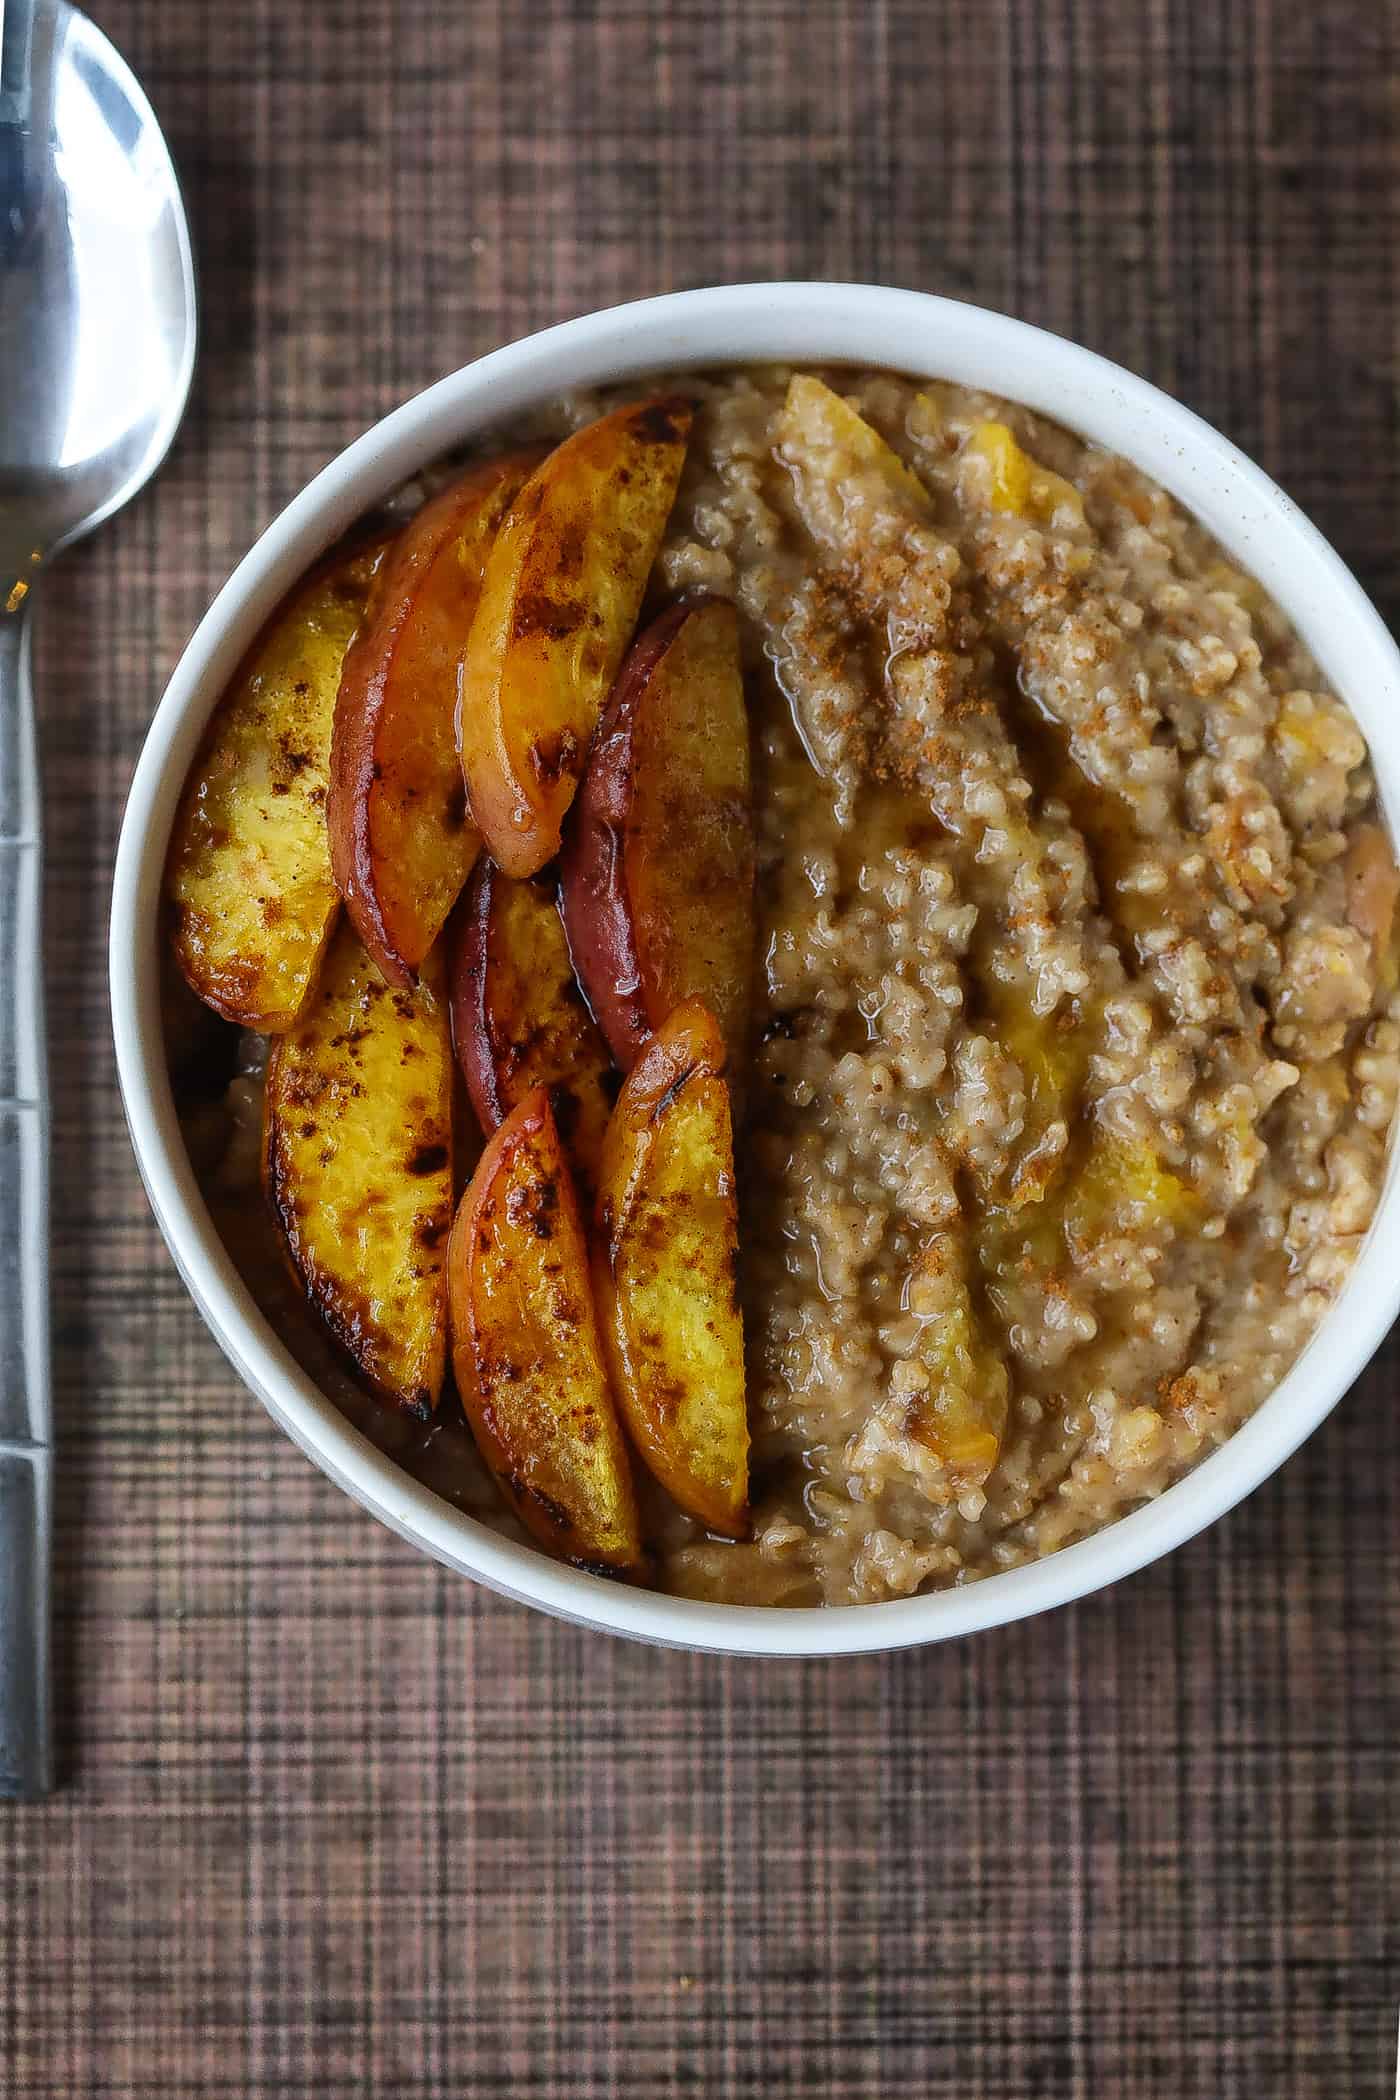 Oatmeal topped with peaches in a white bowl